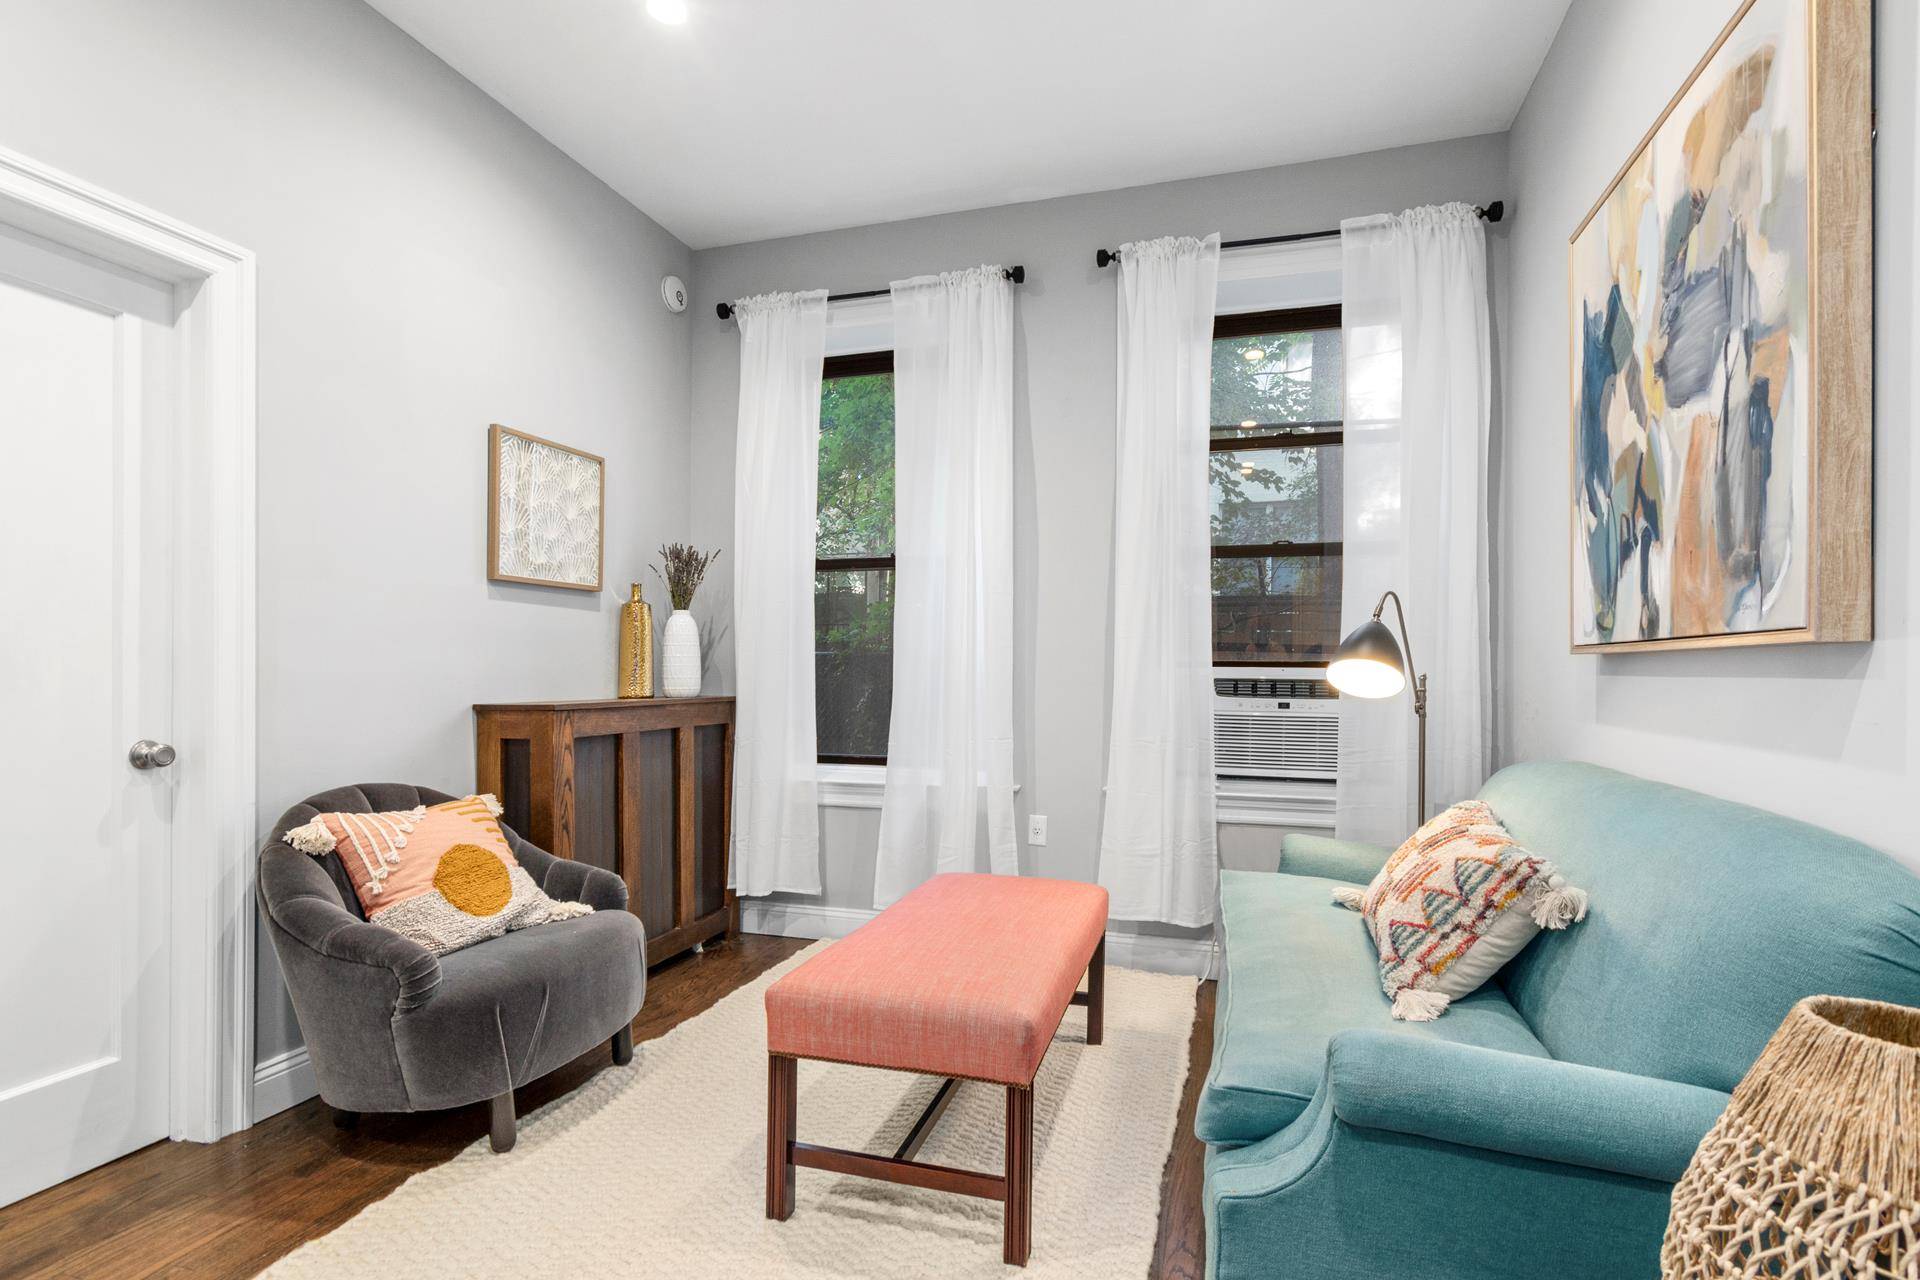 Beautifully renovated one bedroom apartment in an amazing location right by Grand Army Plaza and Prospect Park.